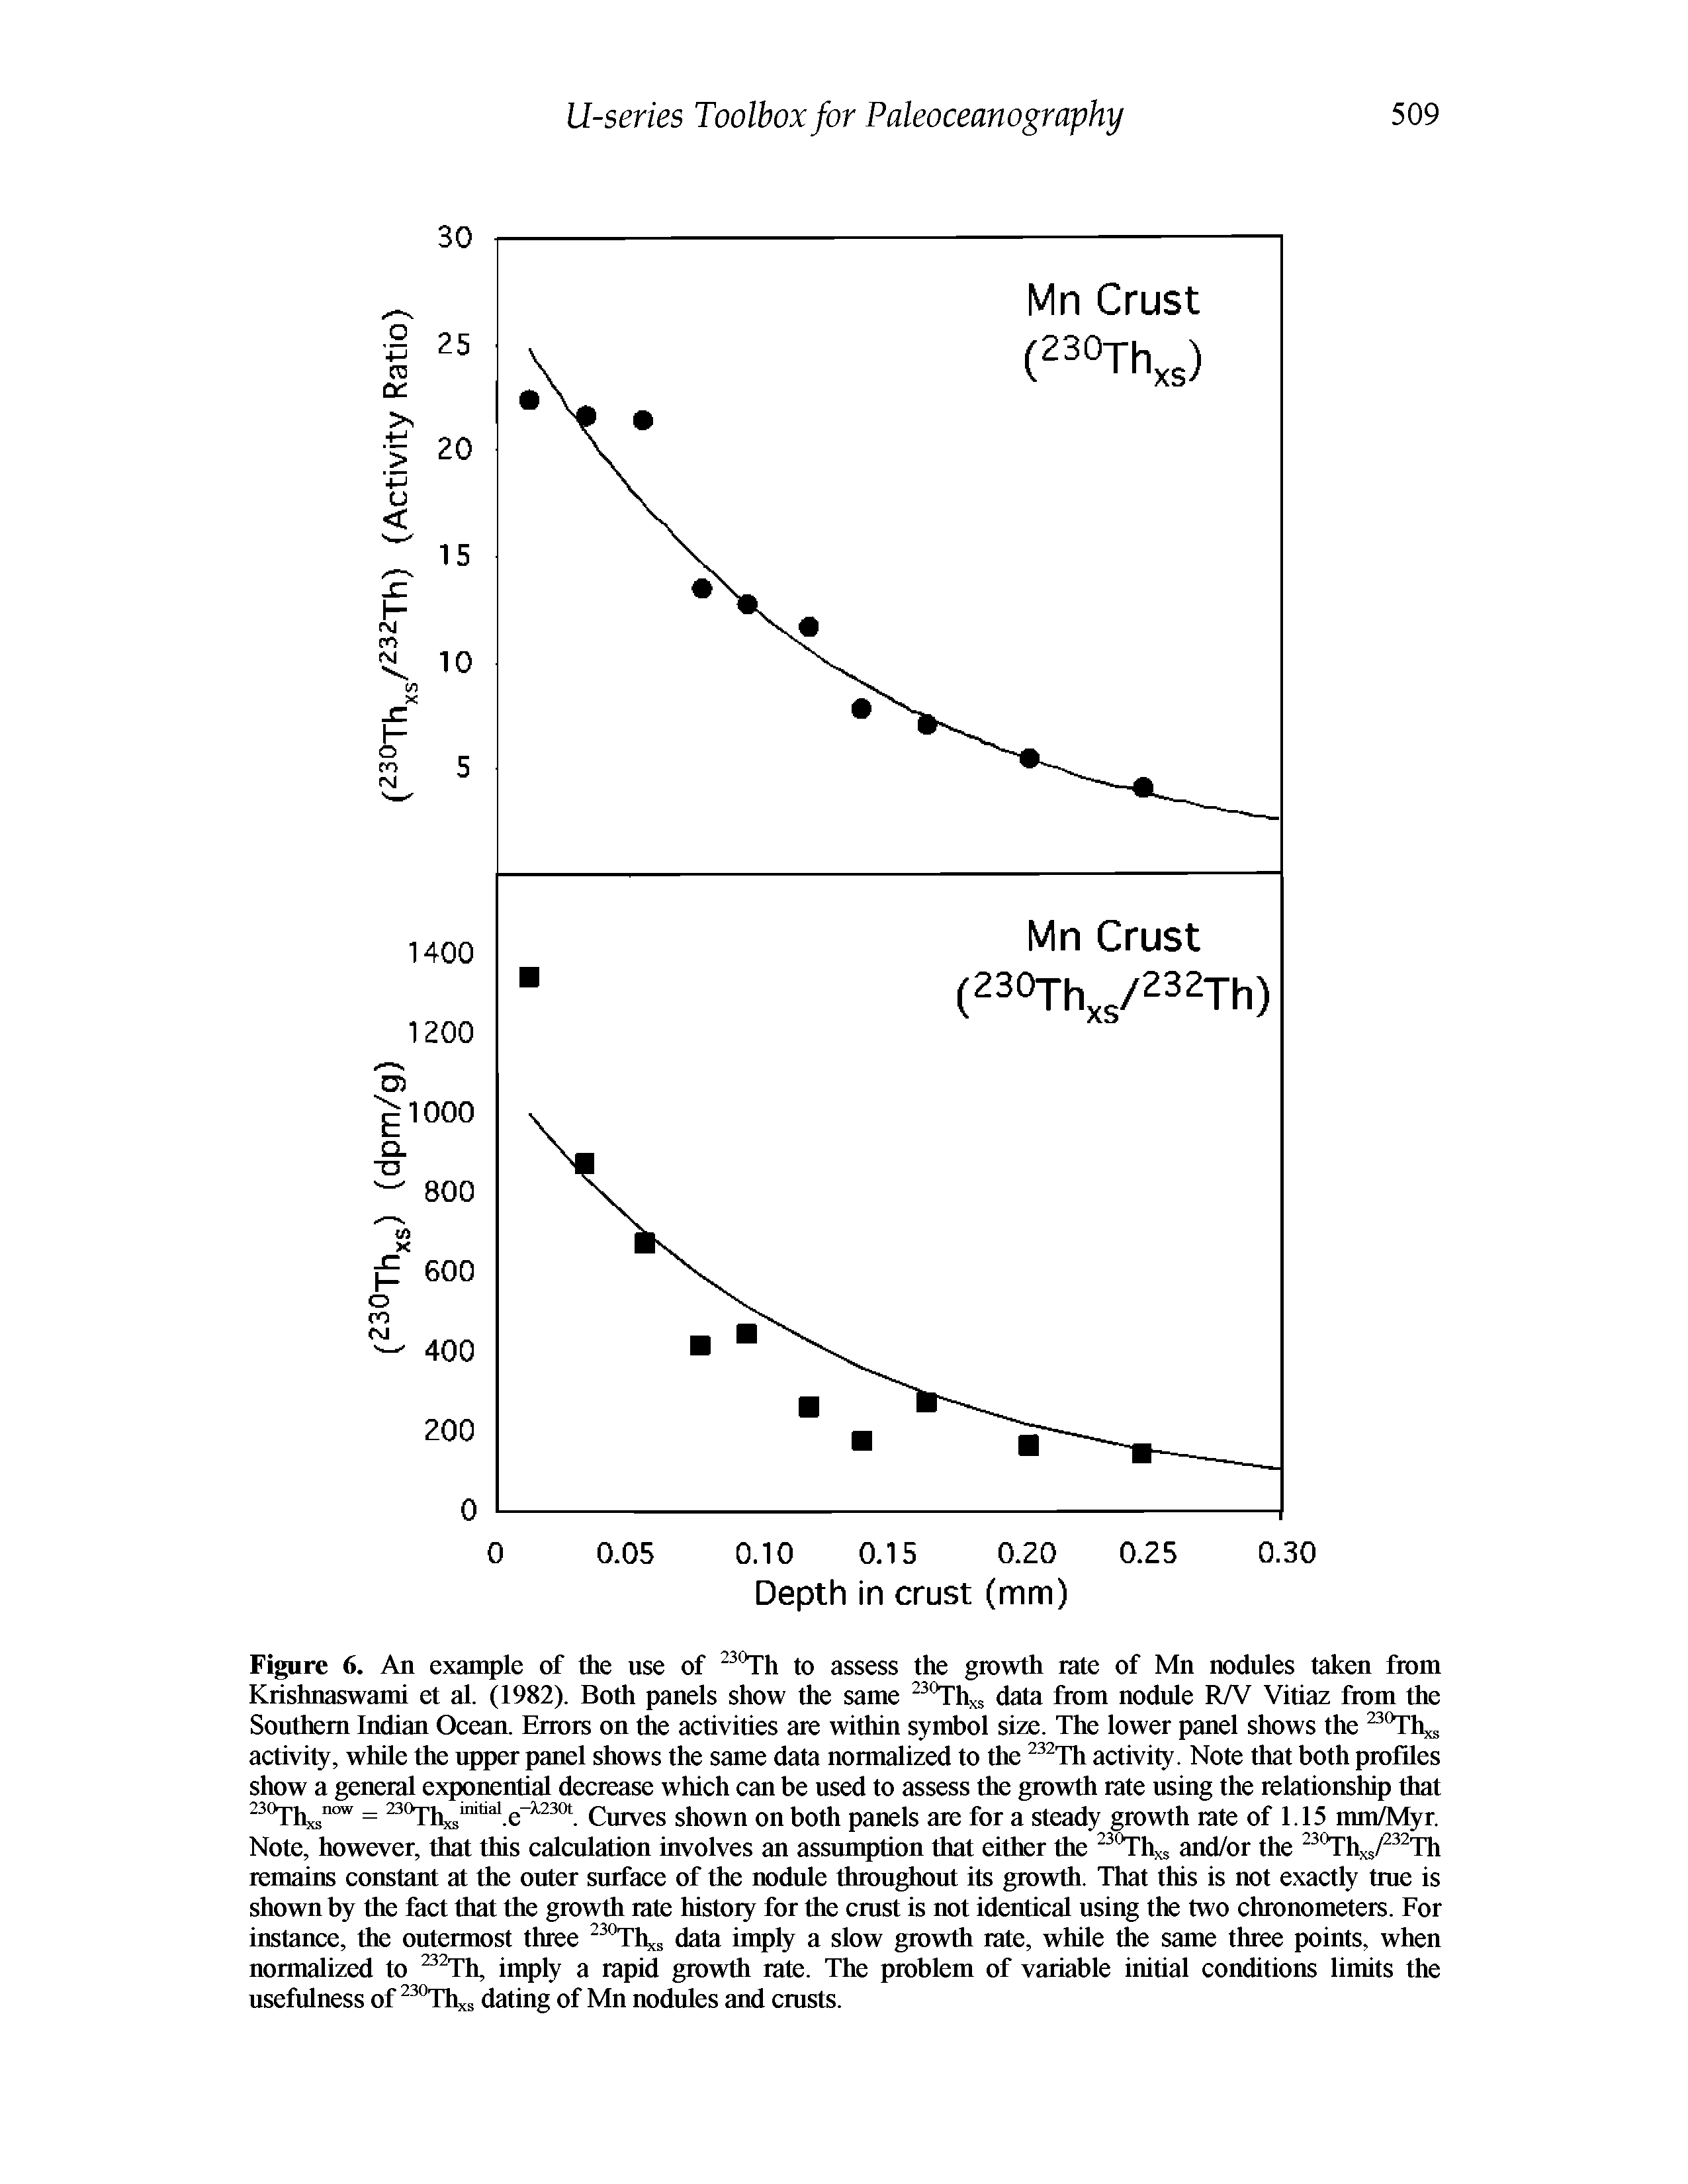 Figure 6. An example of the use of to assess the growth rate of Mn nodules taken from Krishnaswami et al. (1982). Both panels show the same °Thxs data from nodule RN Vitiaz from the Southern Indian Oeean. Errors on the activities are within symbol size. The lower panel shows the hxs activity, while the upper panel shows the same data normalized to the Th activity. Note that both profiles show a general exponential decrease which can be used to assess the growth rate using the relationship that °Thxs ° = 230j jj imtiai g-X23ot showu ou both panels are for a steady growth rate of 1.15 mmMyr.